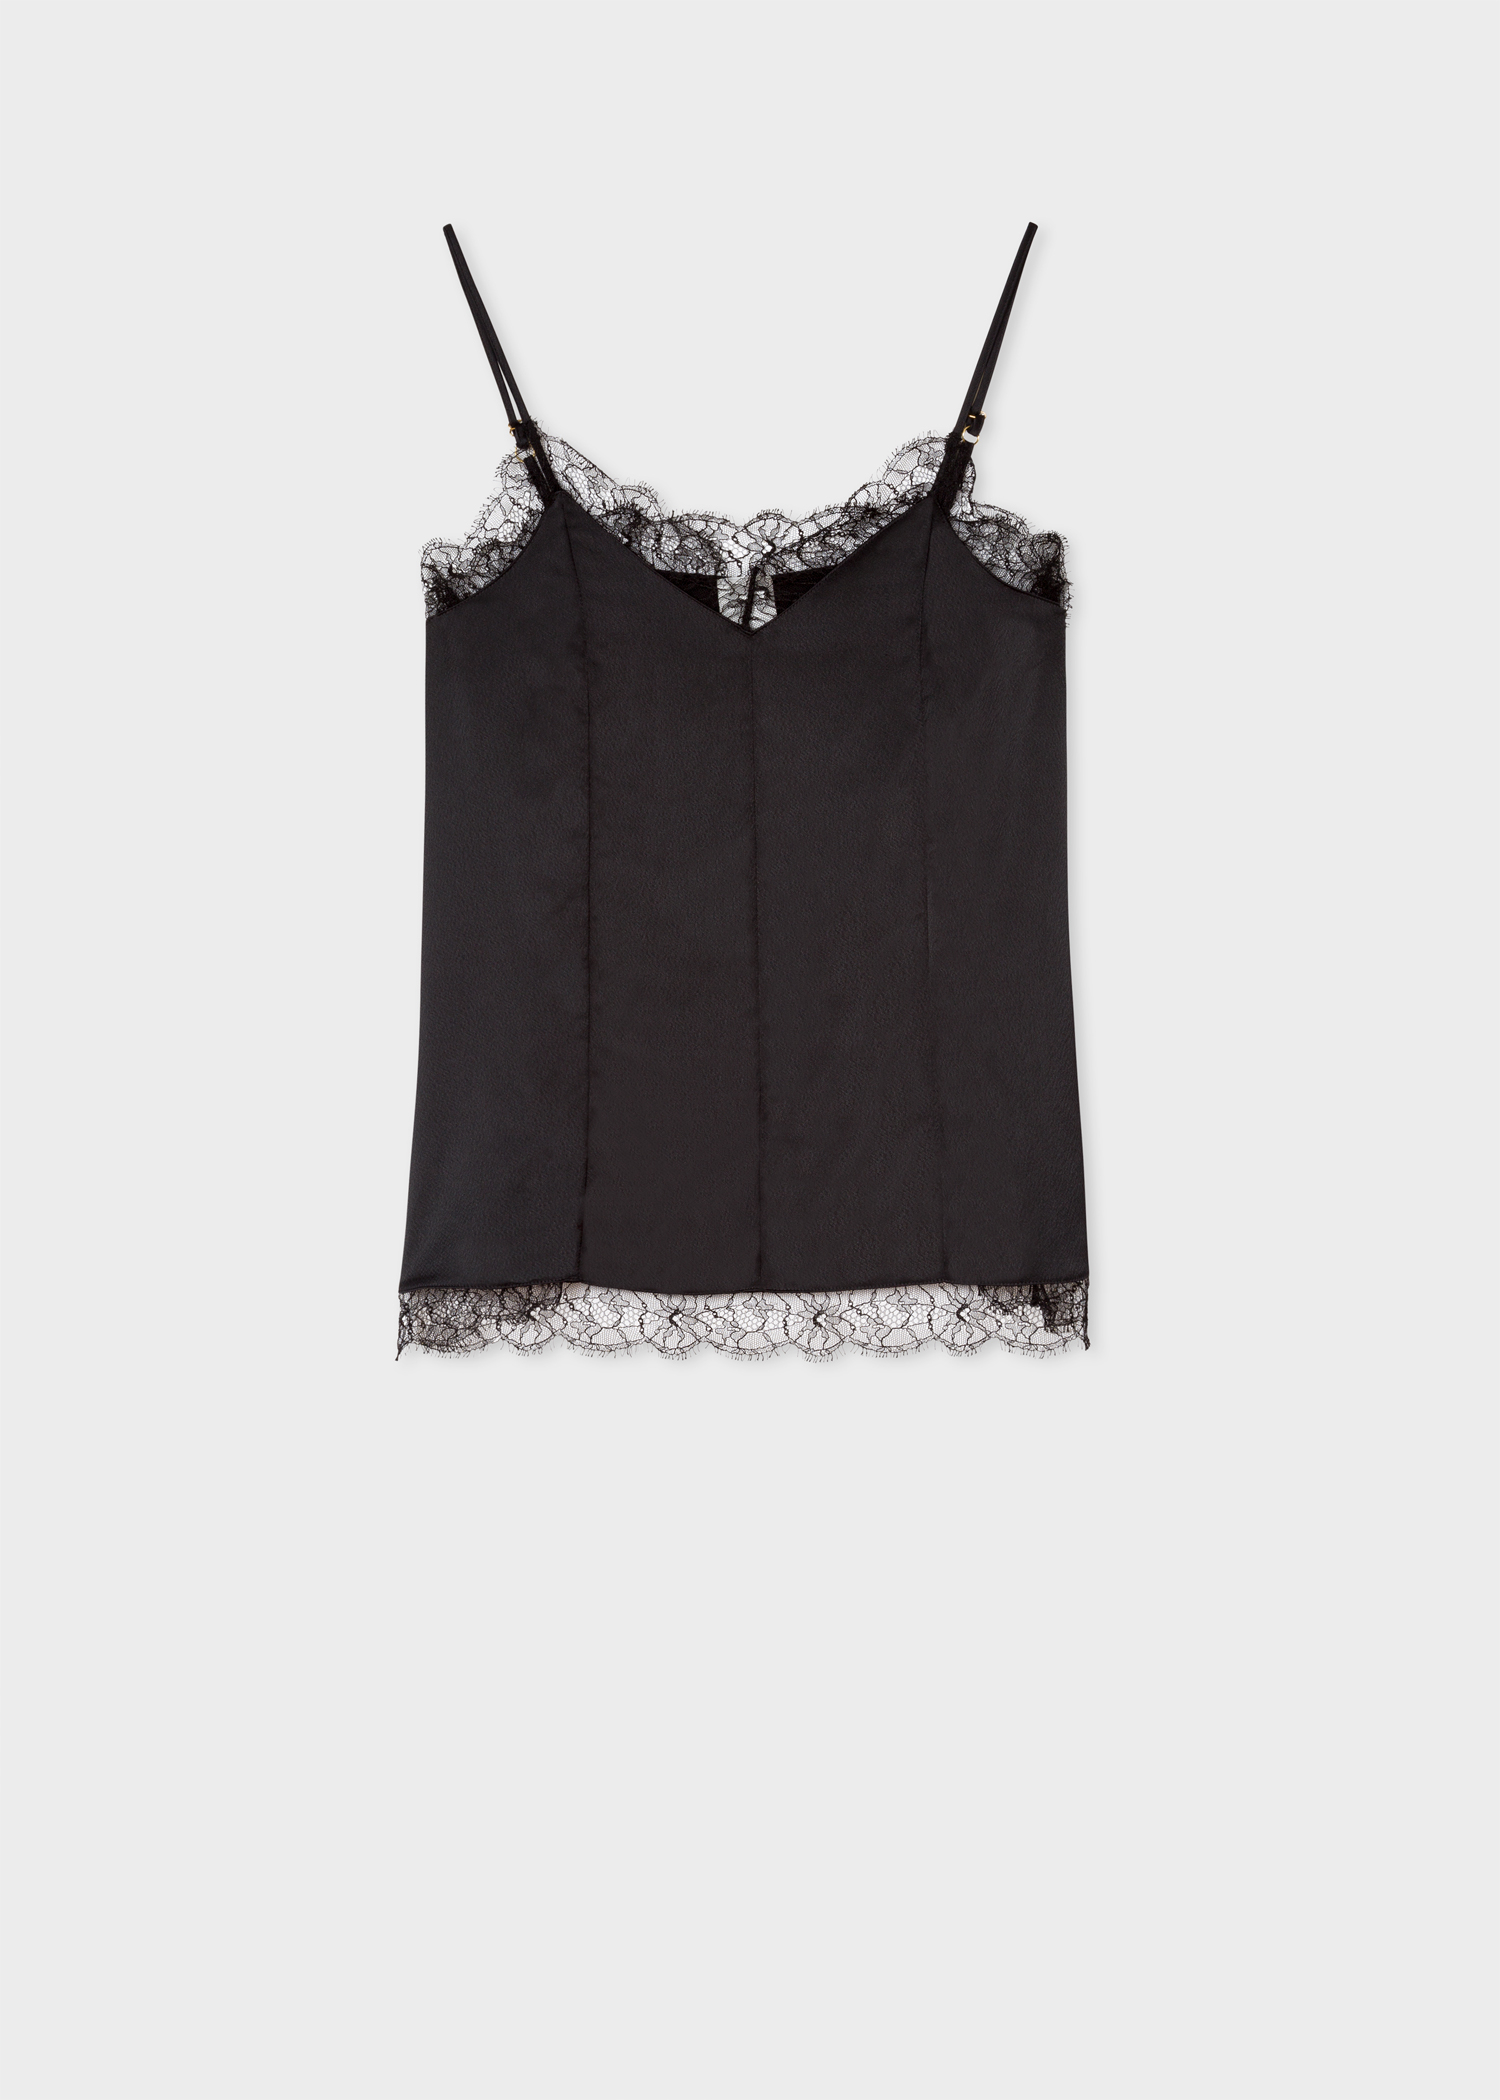 Front view - Women's Black Satin Tuxedo Cami Top with Lace Trims Paul Smith